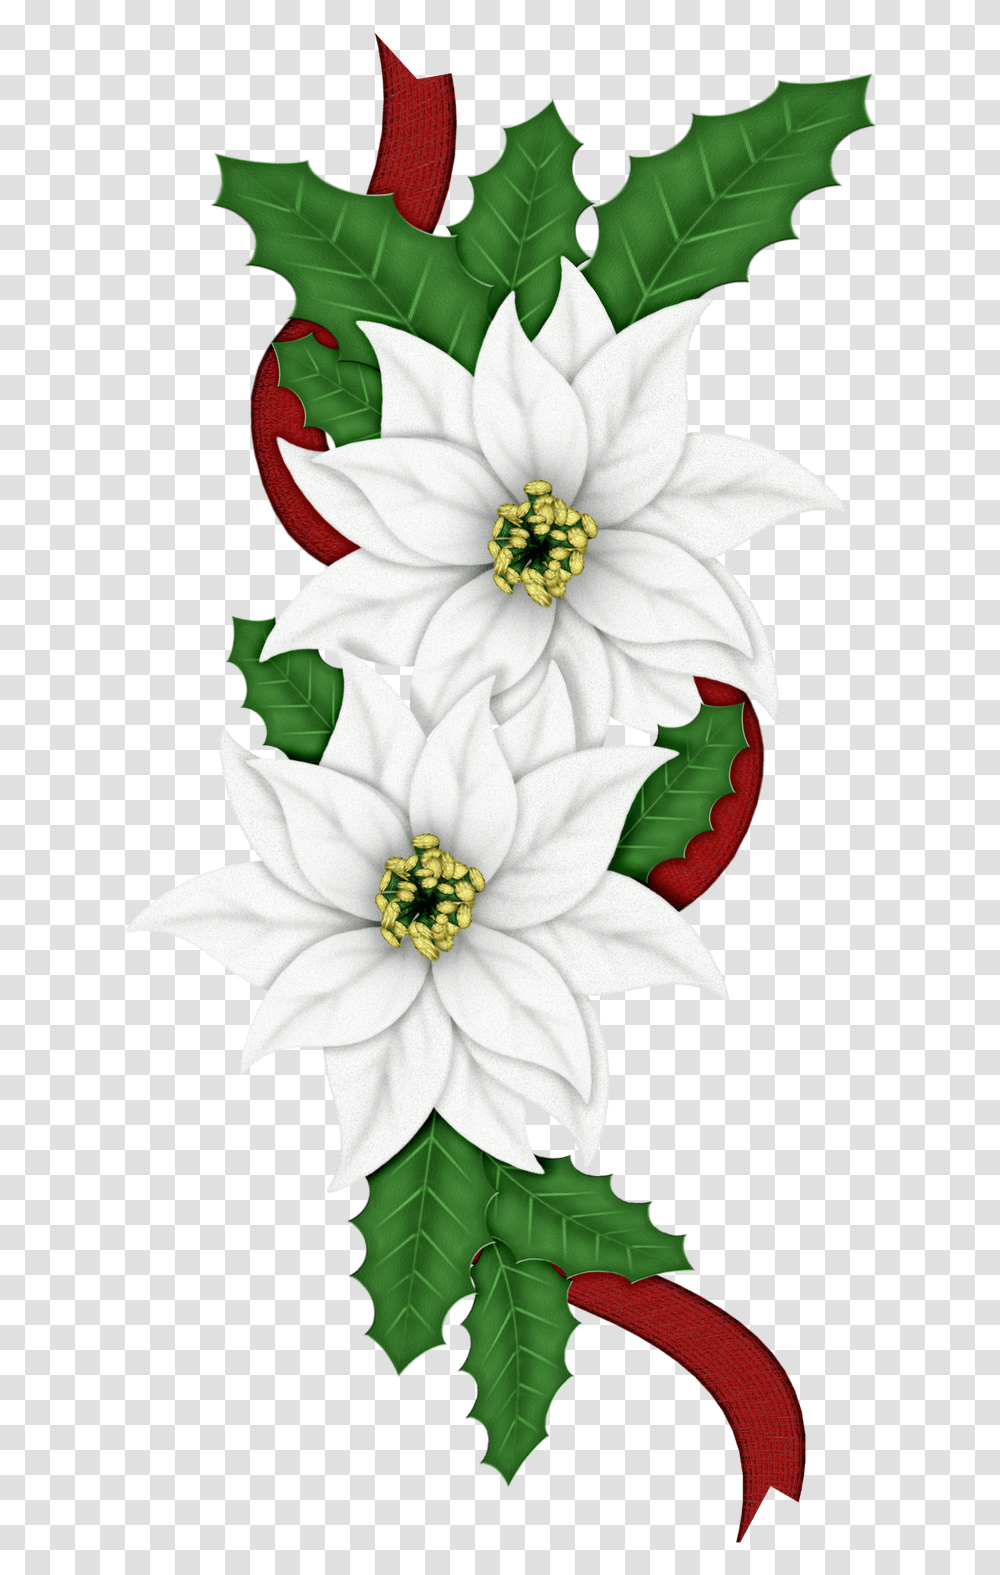 Edelweiss Flower Images Free Download Christmas Edelweiss, Plant, Pattern, Floral Design, Graphics Transparent Png